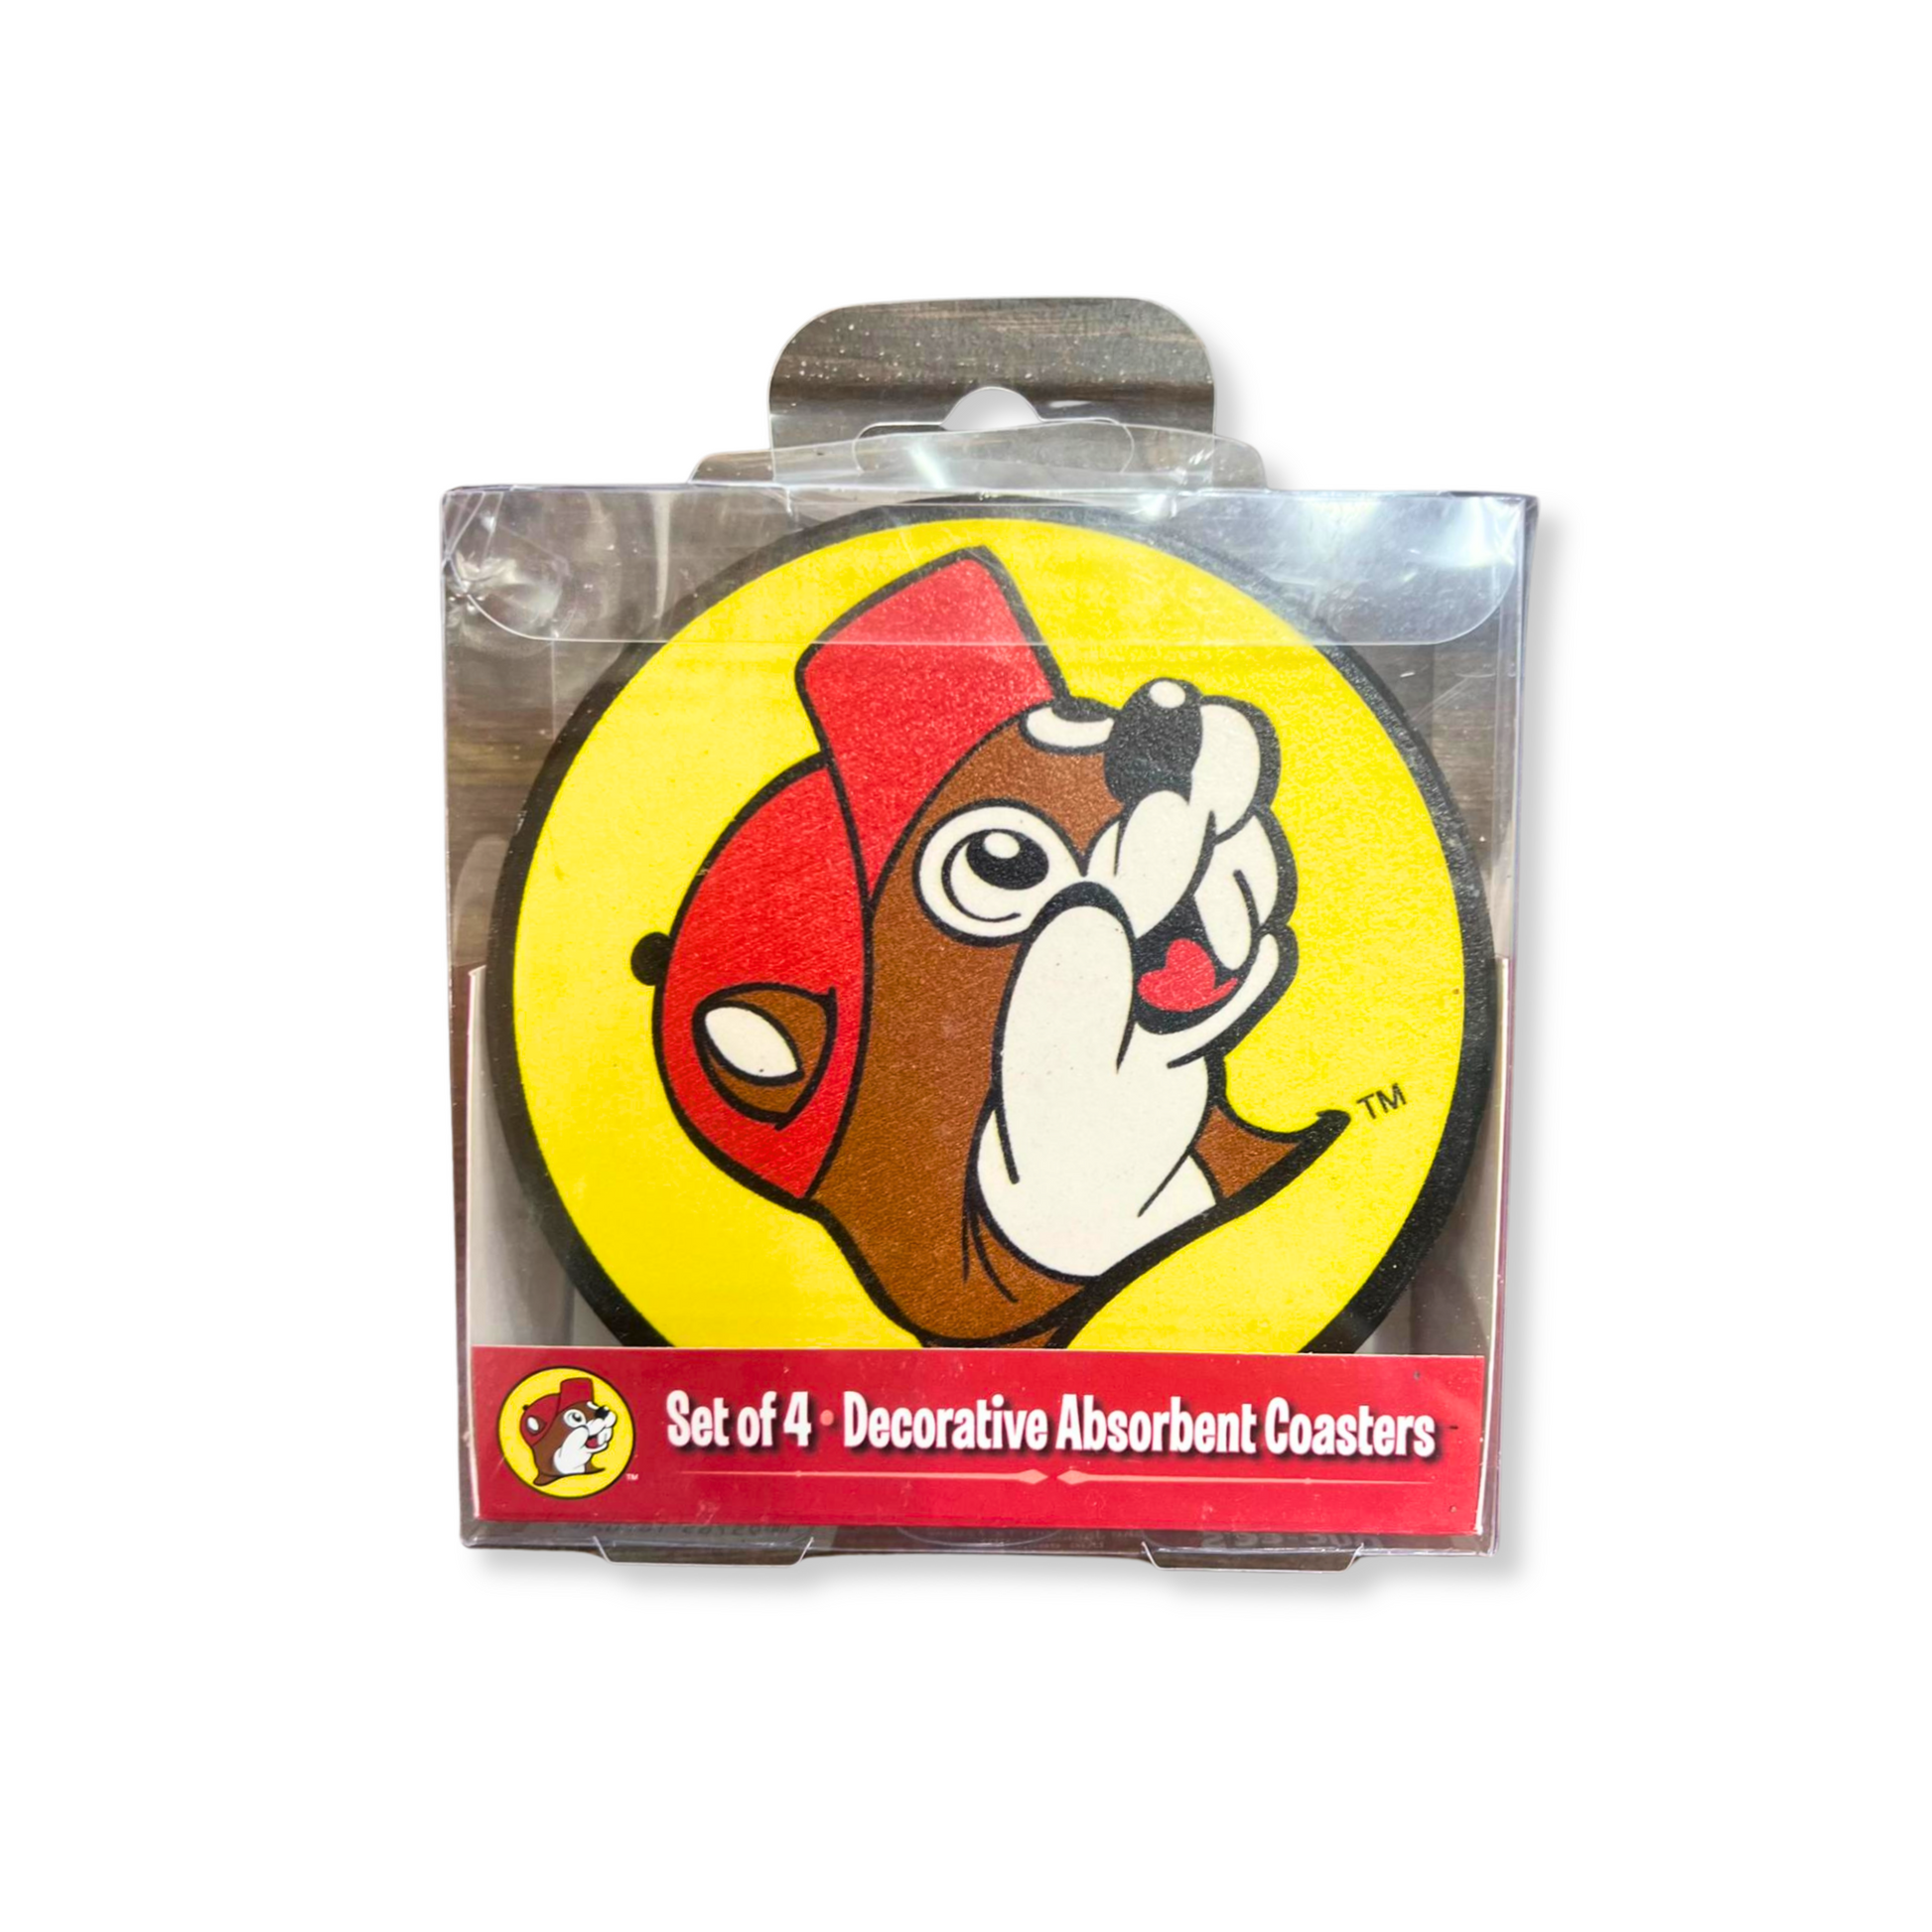 Buc-ee's Set of 4 Decorative Absorbent Coasters buc ees buc ee's bucees buccees buc-ees